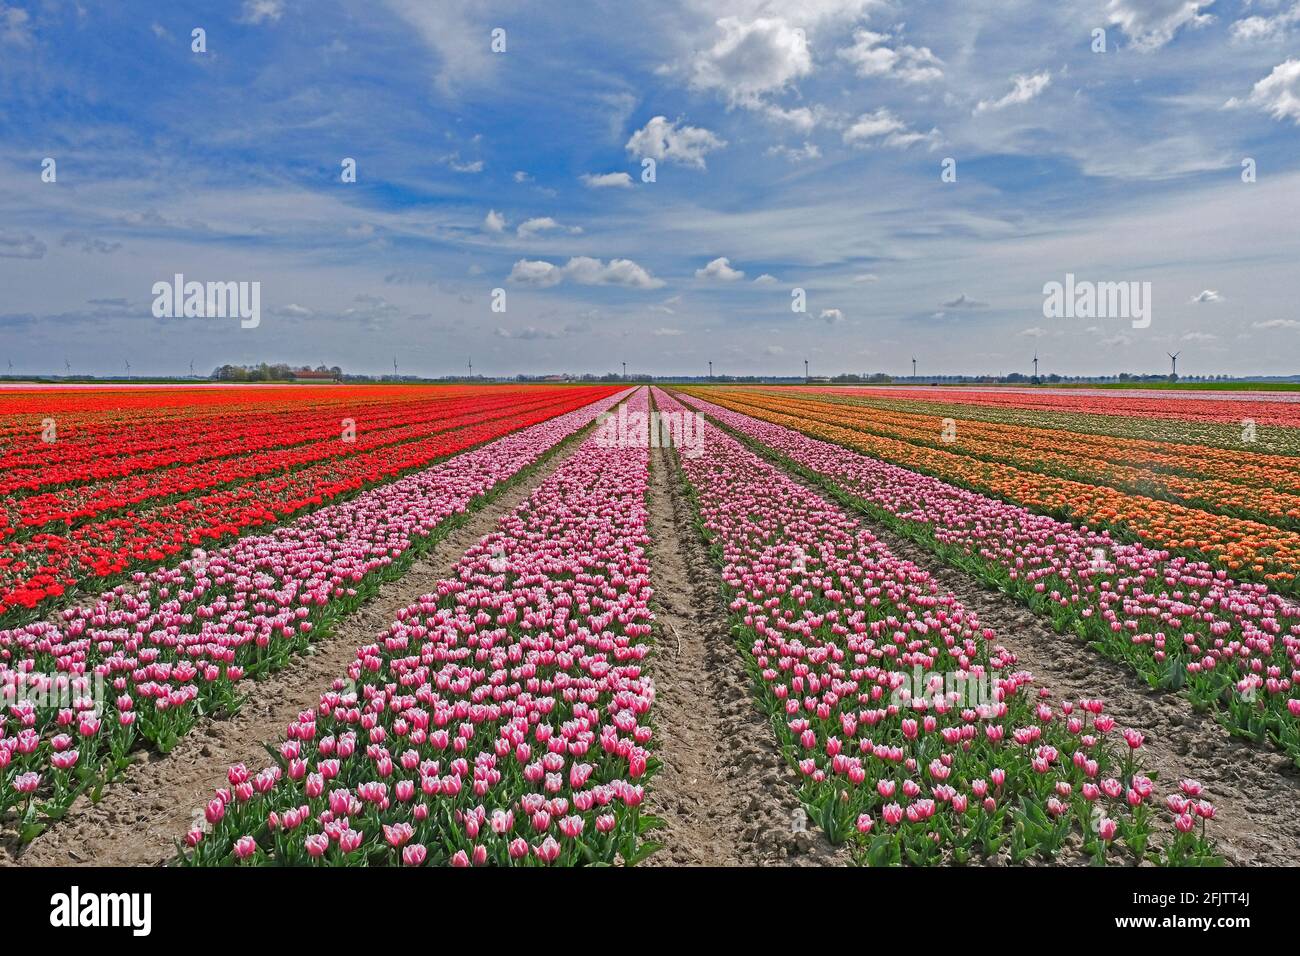 Rows of red, pink and orange tulips in Dutch tulip field in spring at the Flevopolder, Flevoland province, the Netherlands Stock Photo